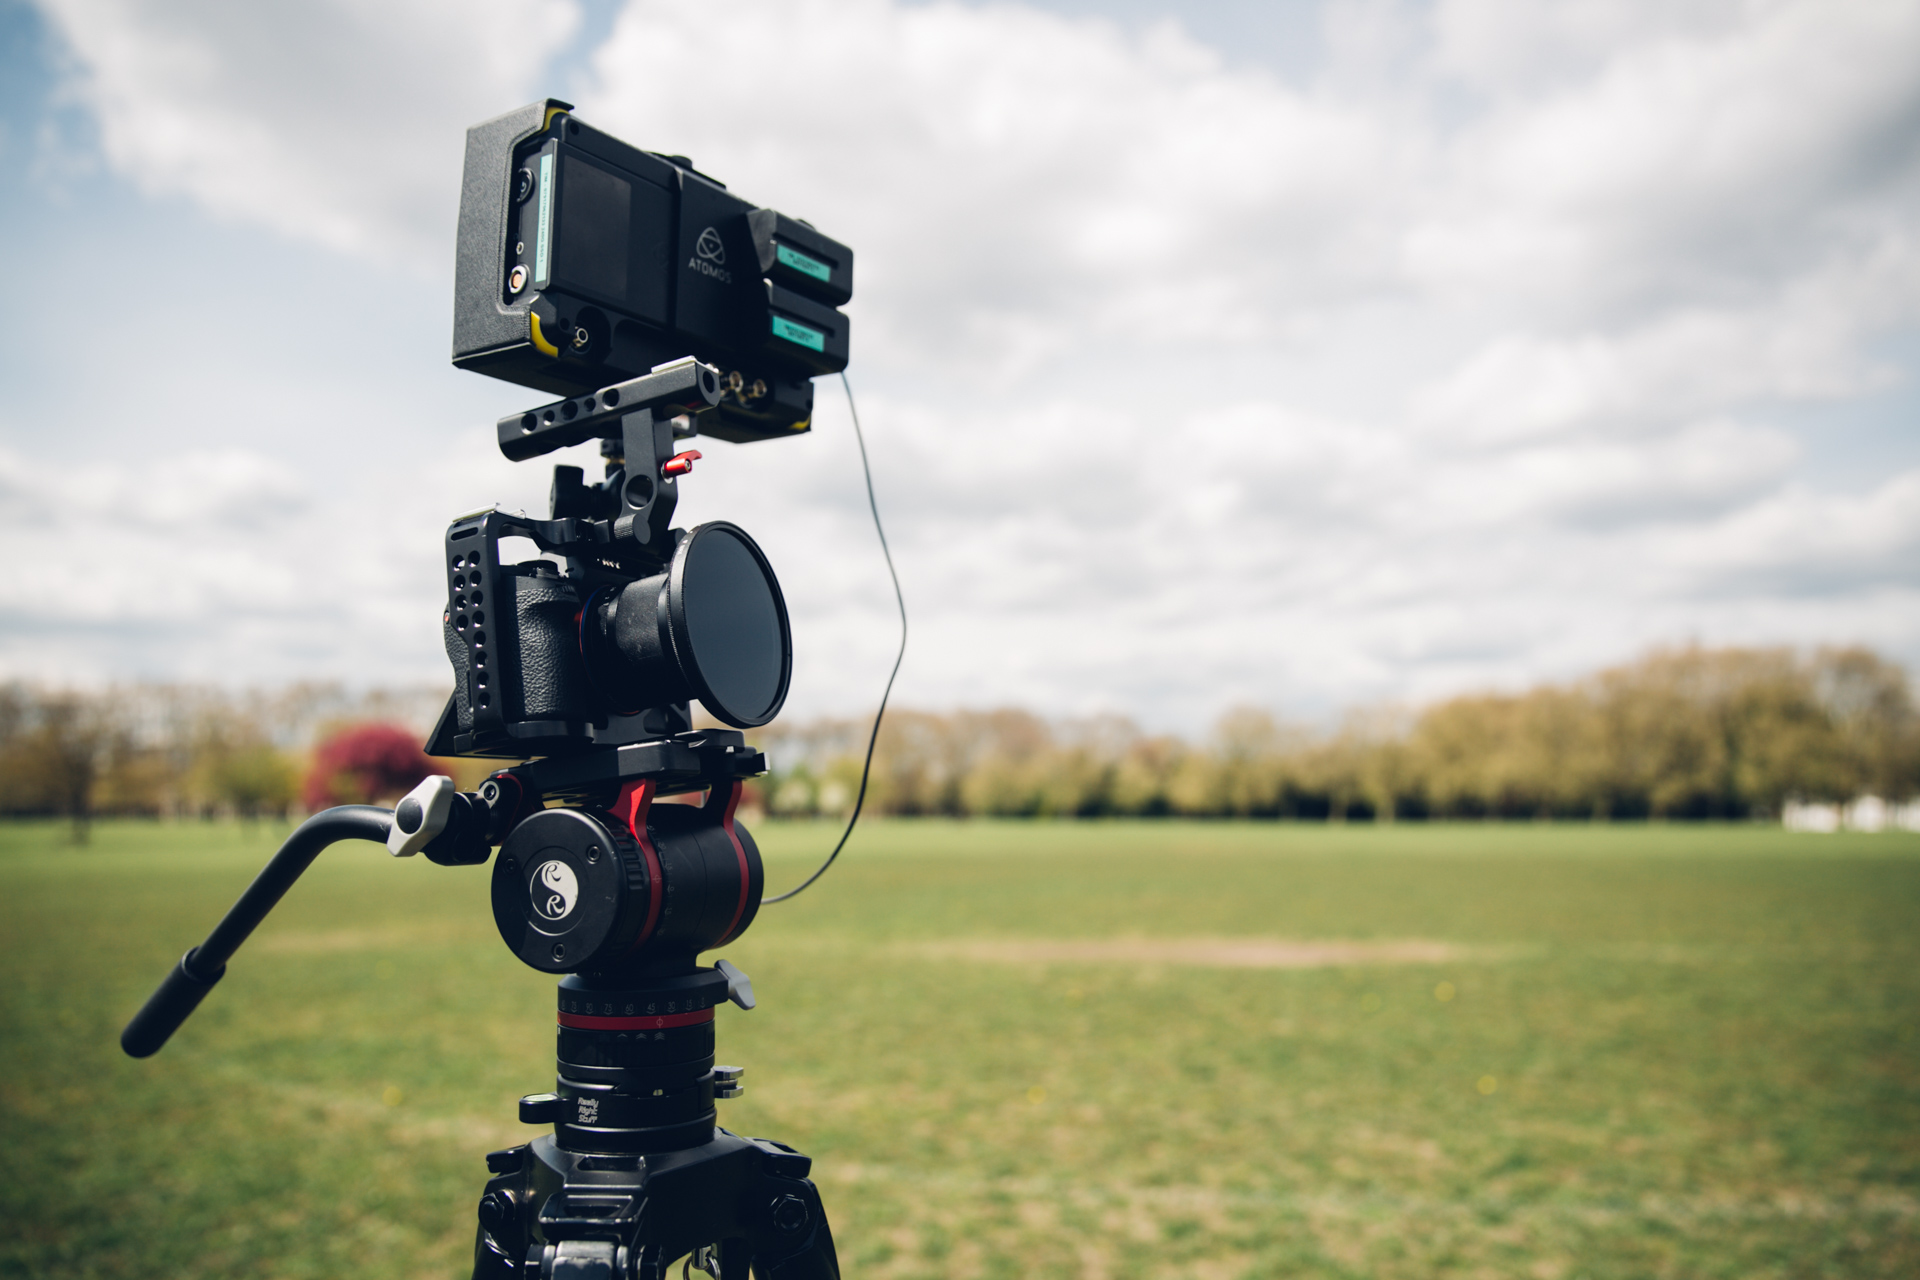 Atomos Shogun Flame Review - An In-the-Field Operator's View | CineD